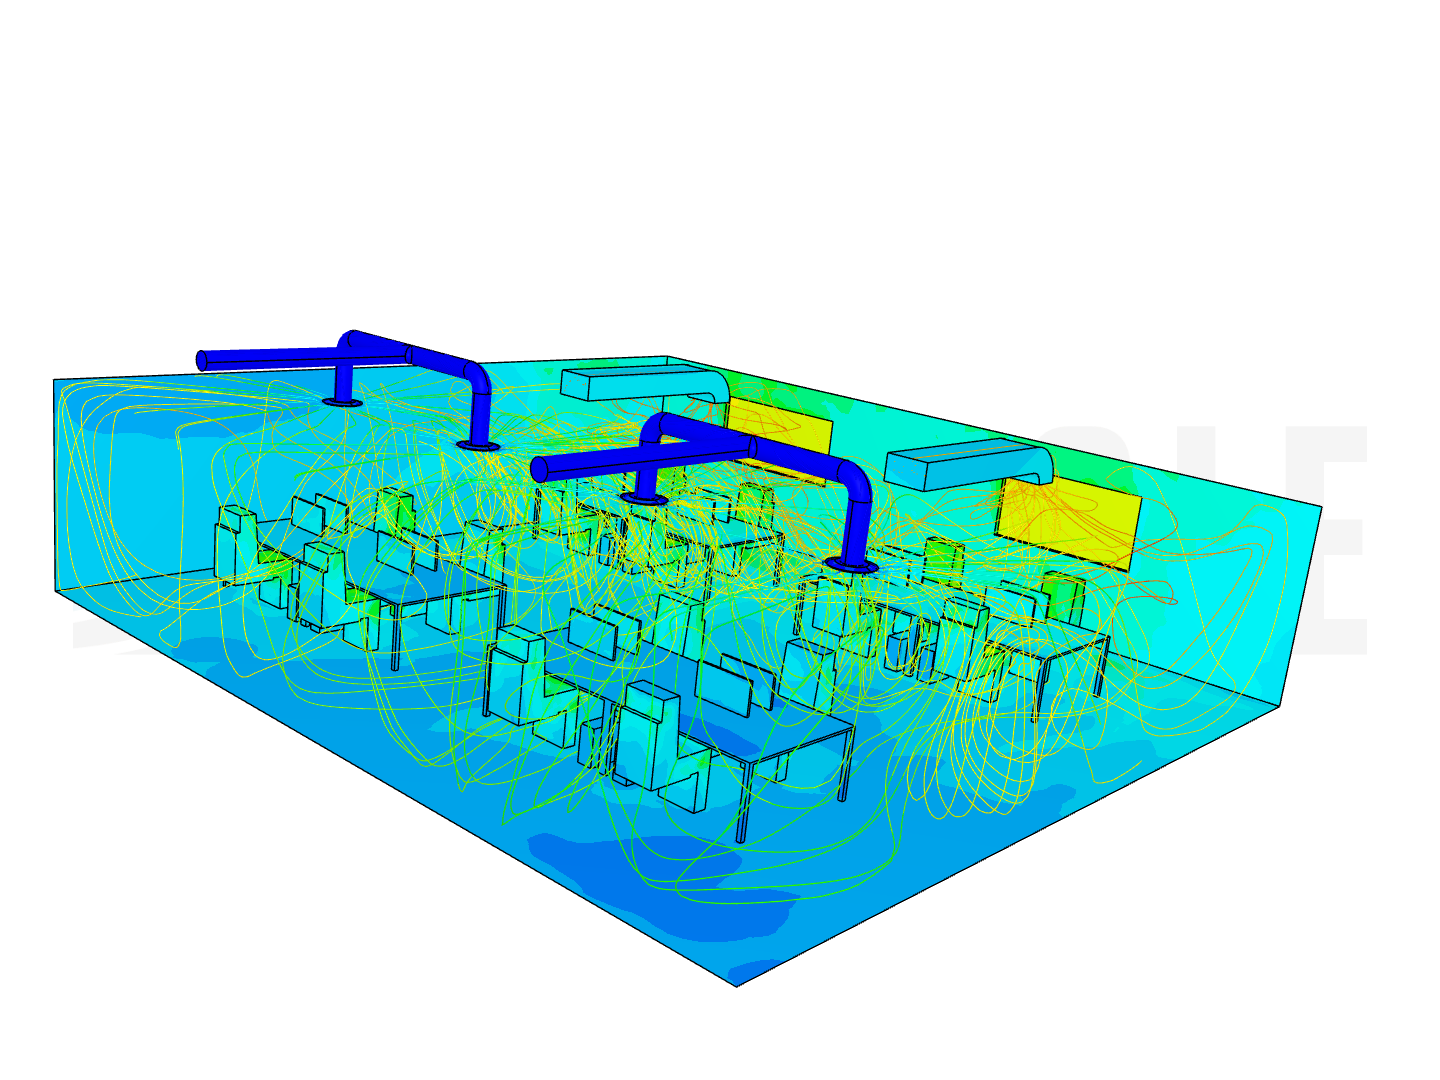 Ventilation and Thermal Comfort Analysis of an office space image